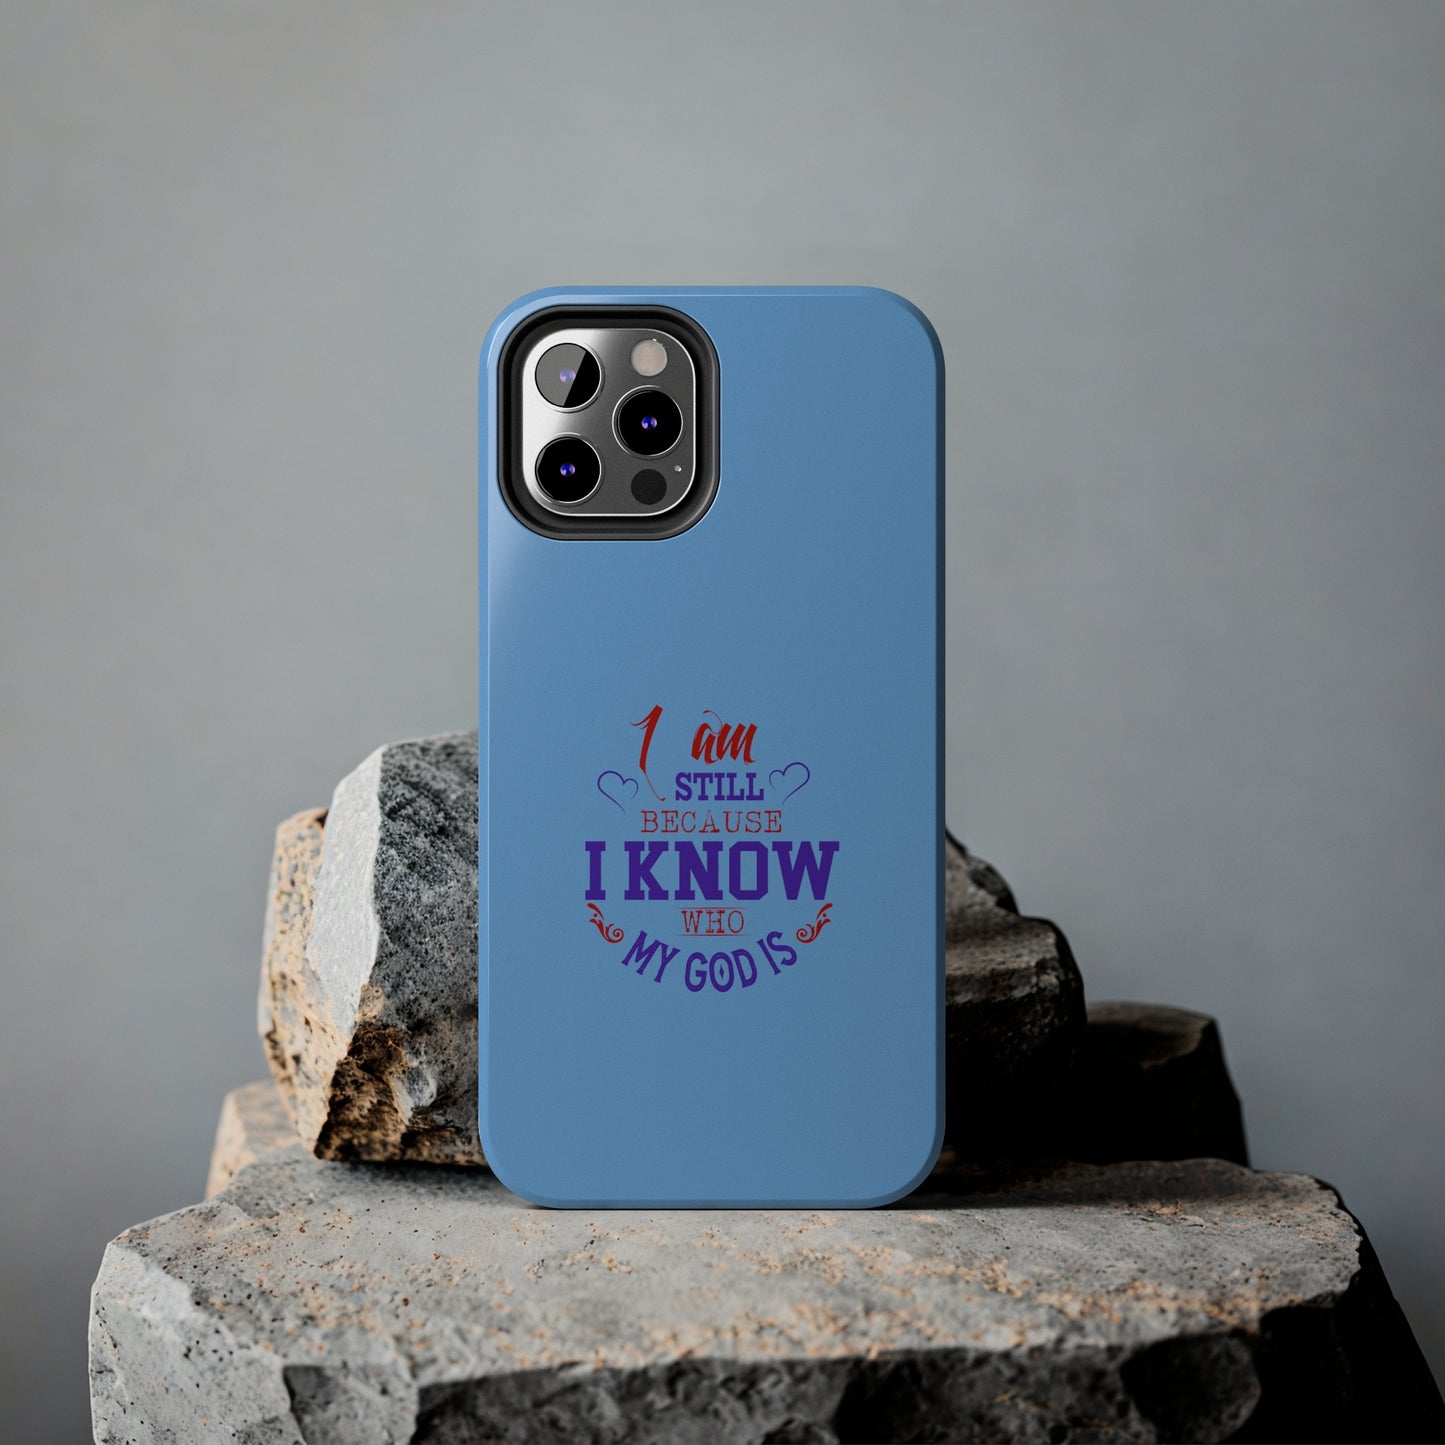 I Am Still Because I Know Who My God Is Tough Phone Cases, Case-Mate